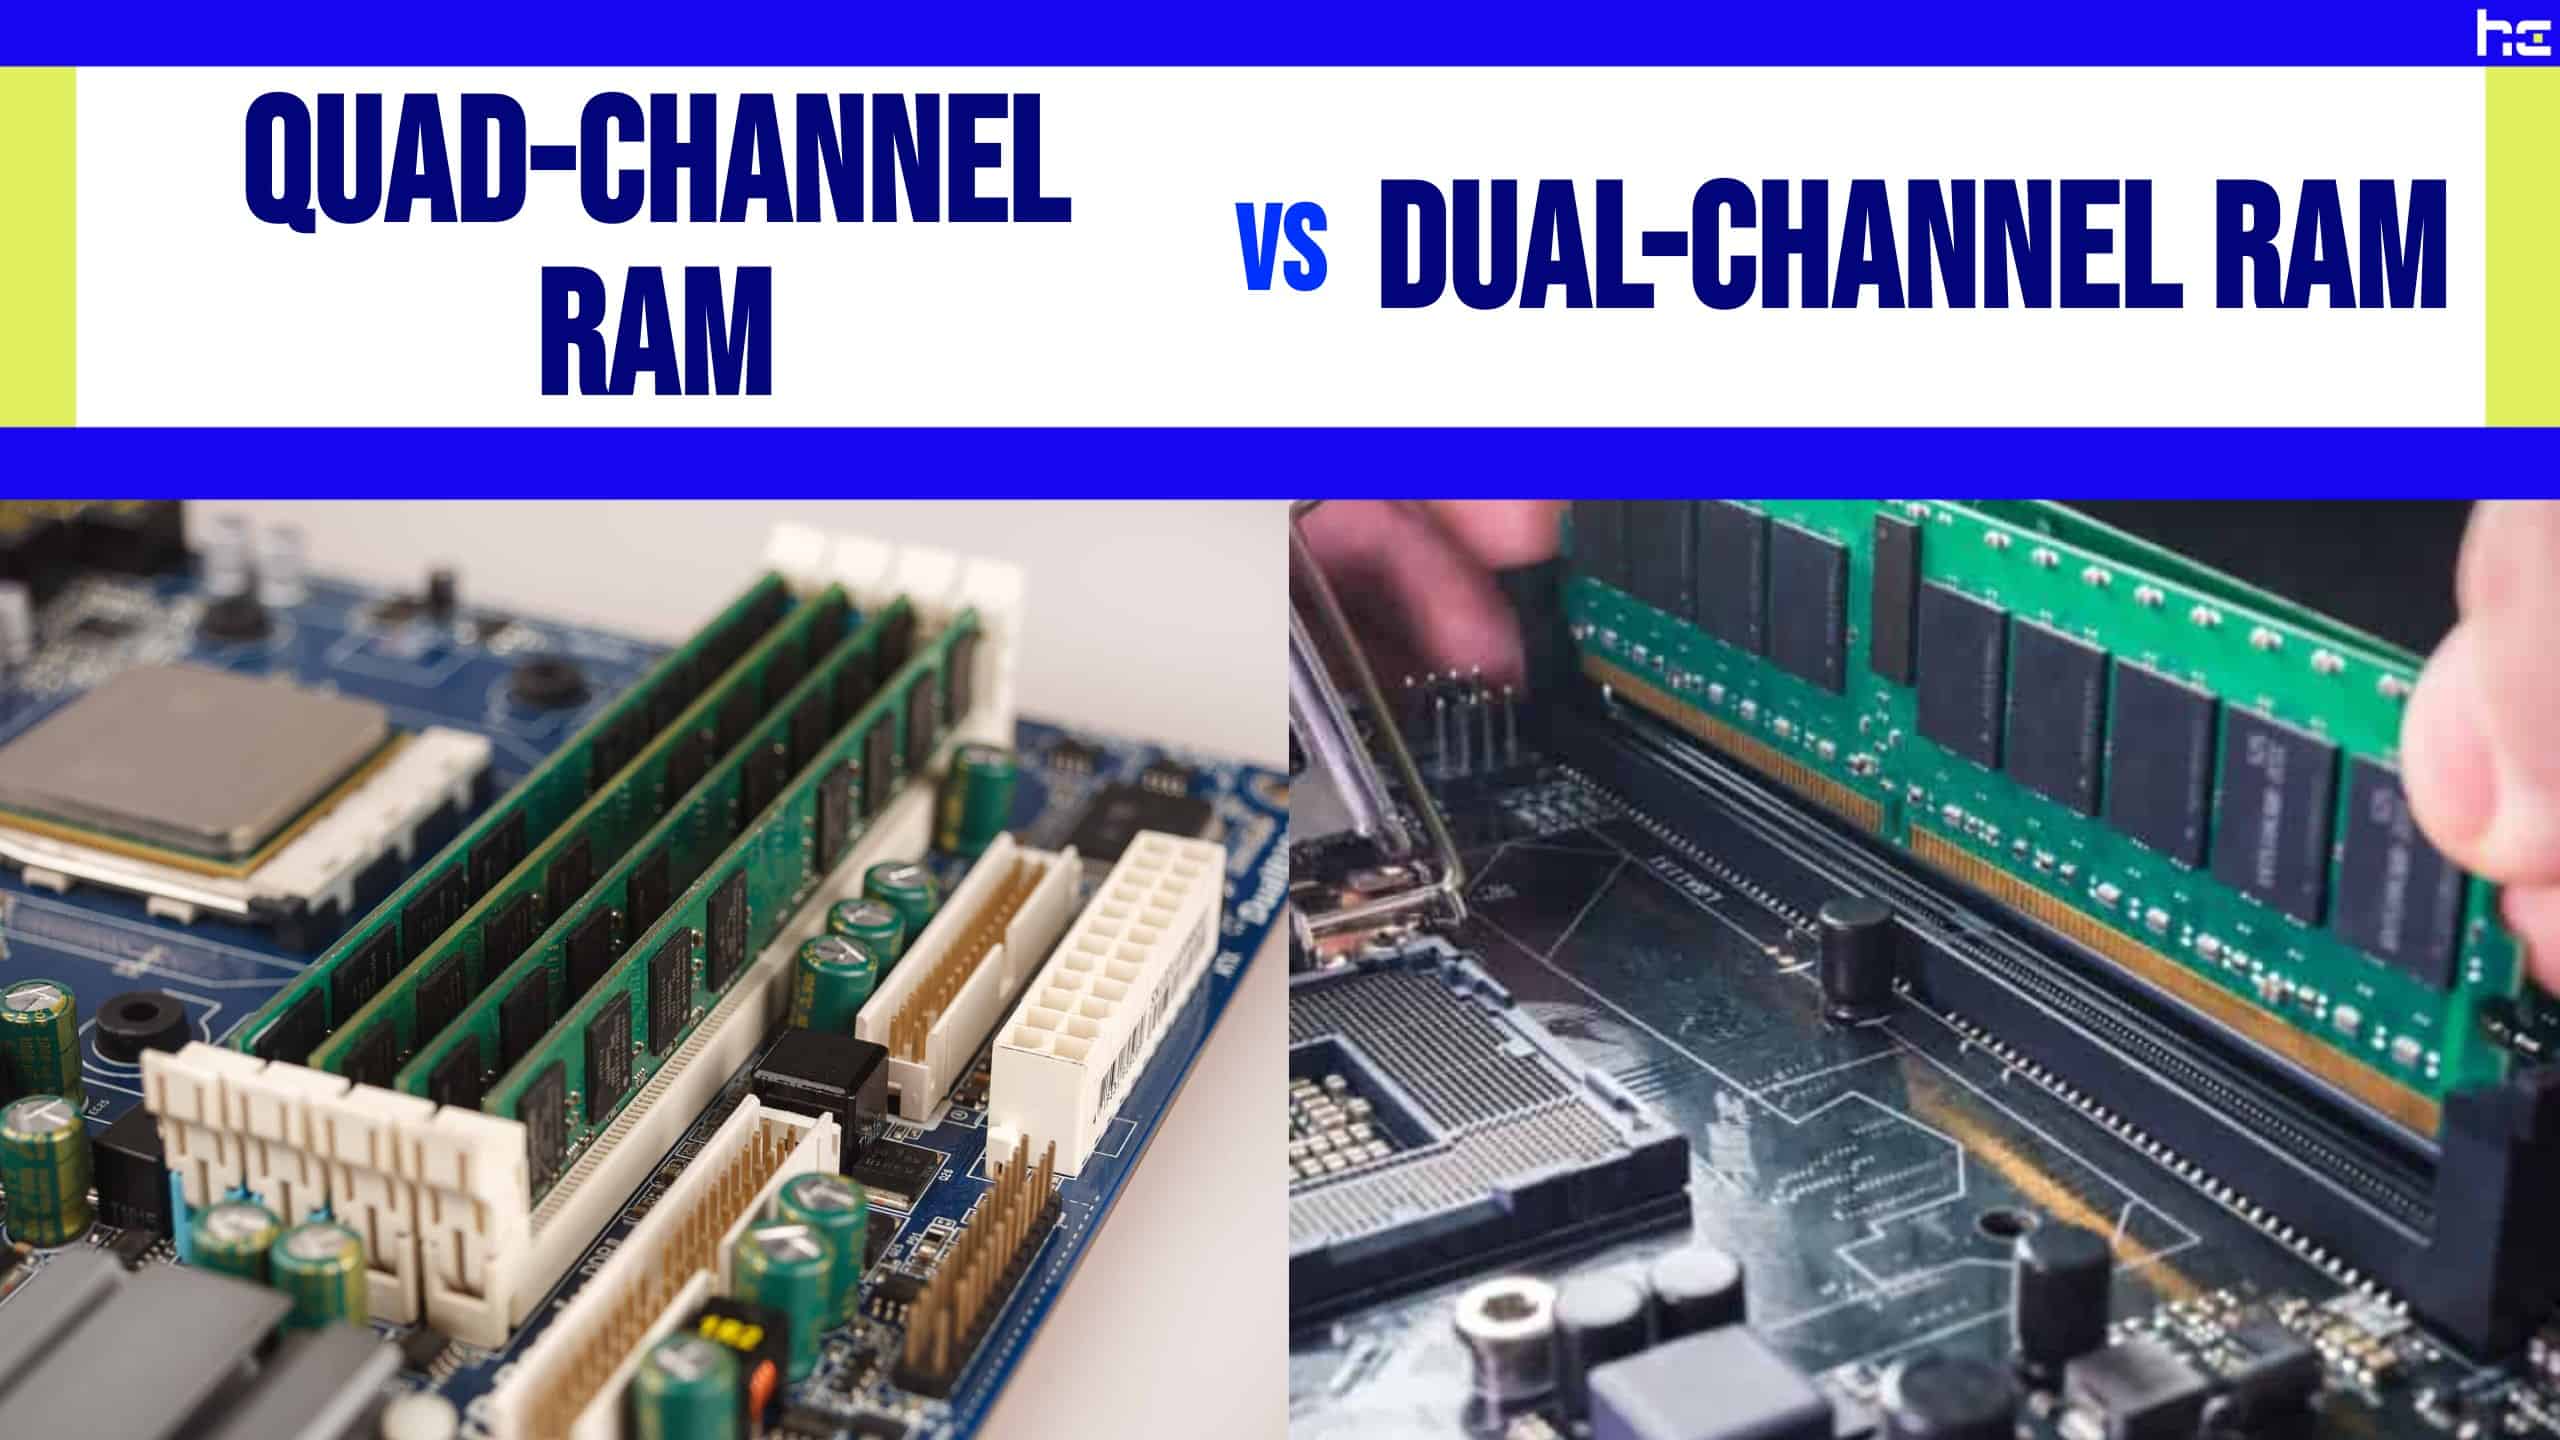 Quad-Channel RAM vs Dual-Channel RAM featured image